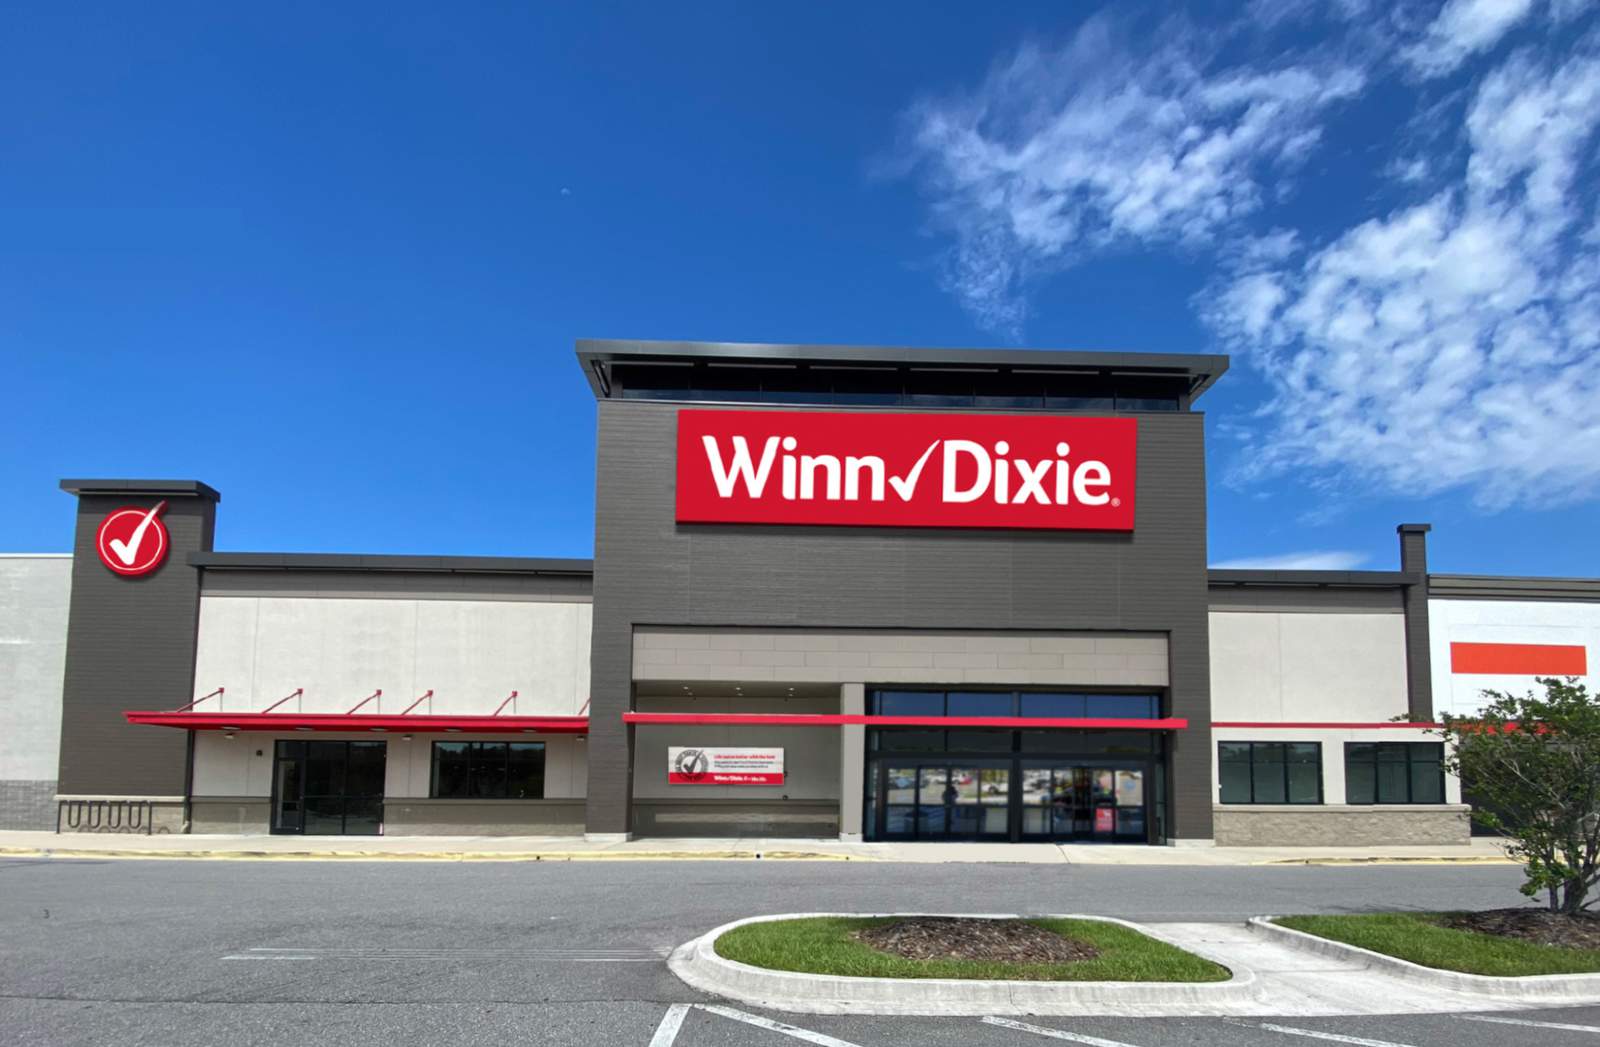 4 new Winn-Dixie stores coming to Florida